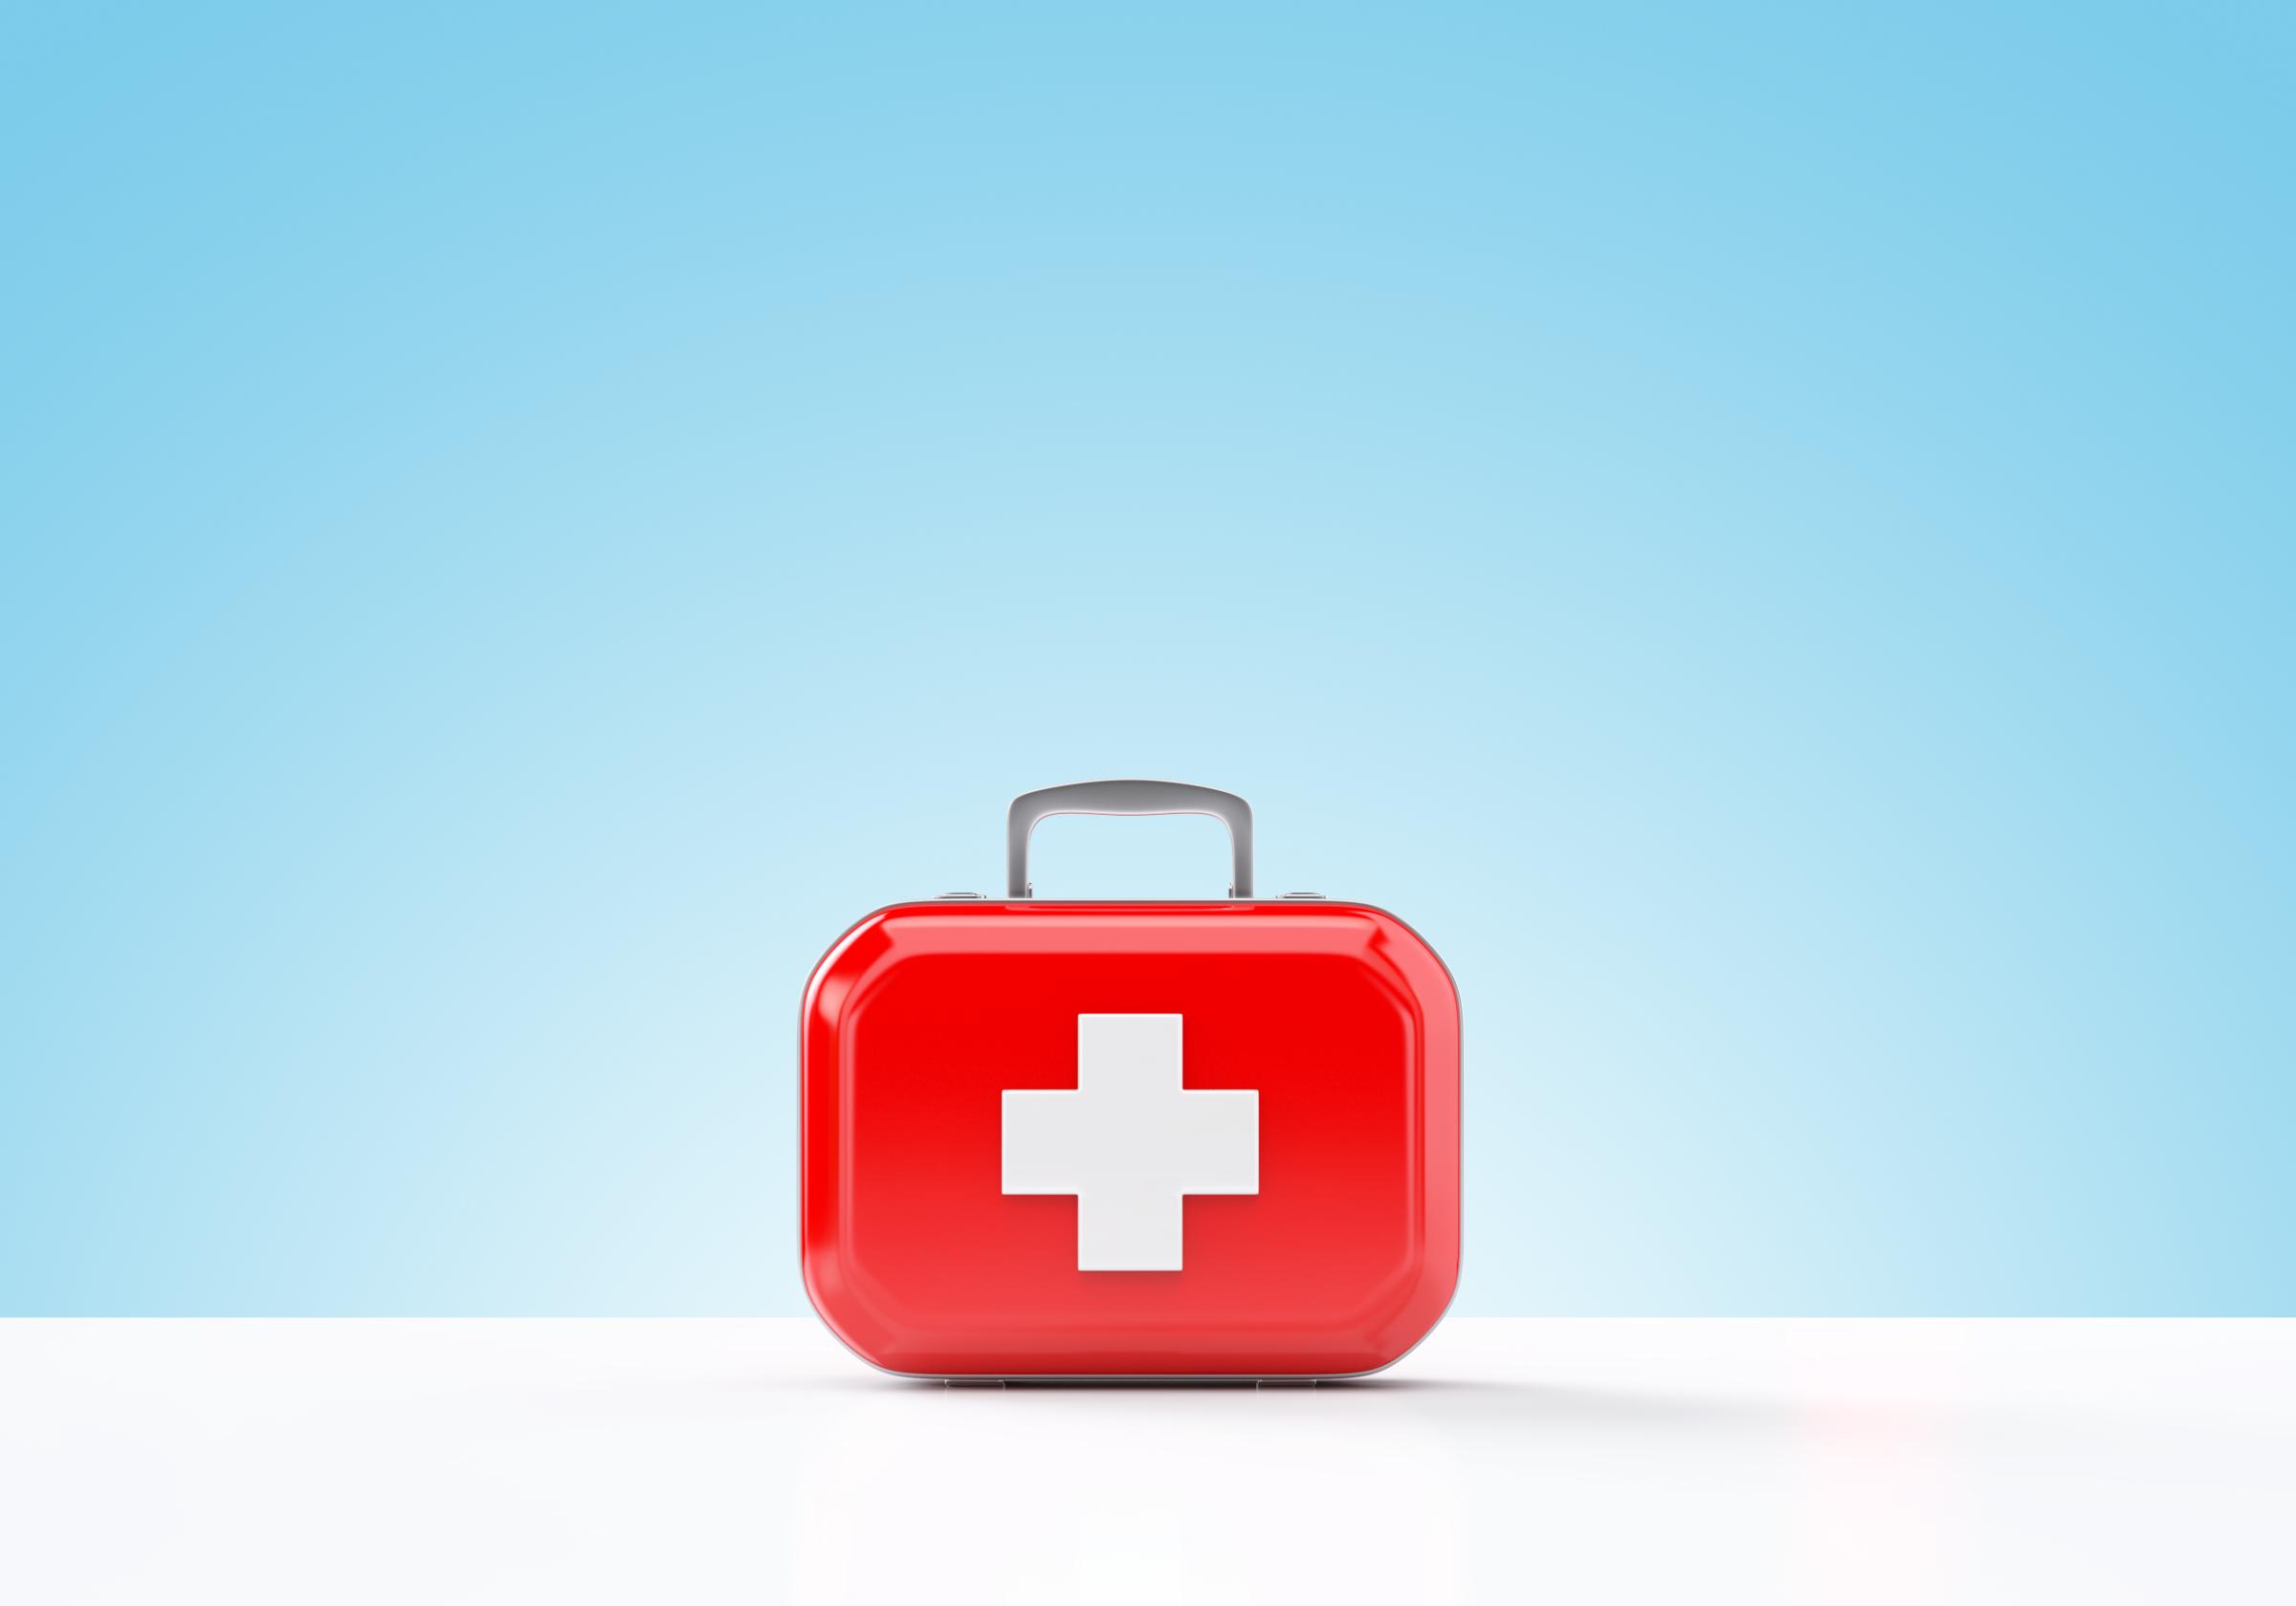 First aid kit standing on a blue and white background TIME health stock